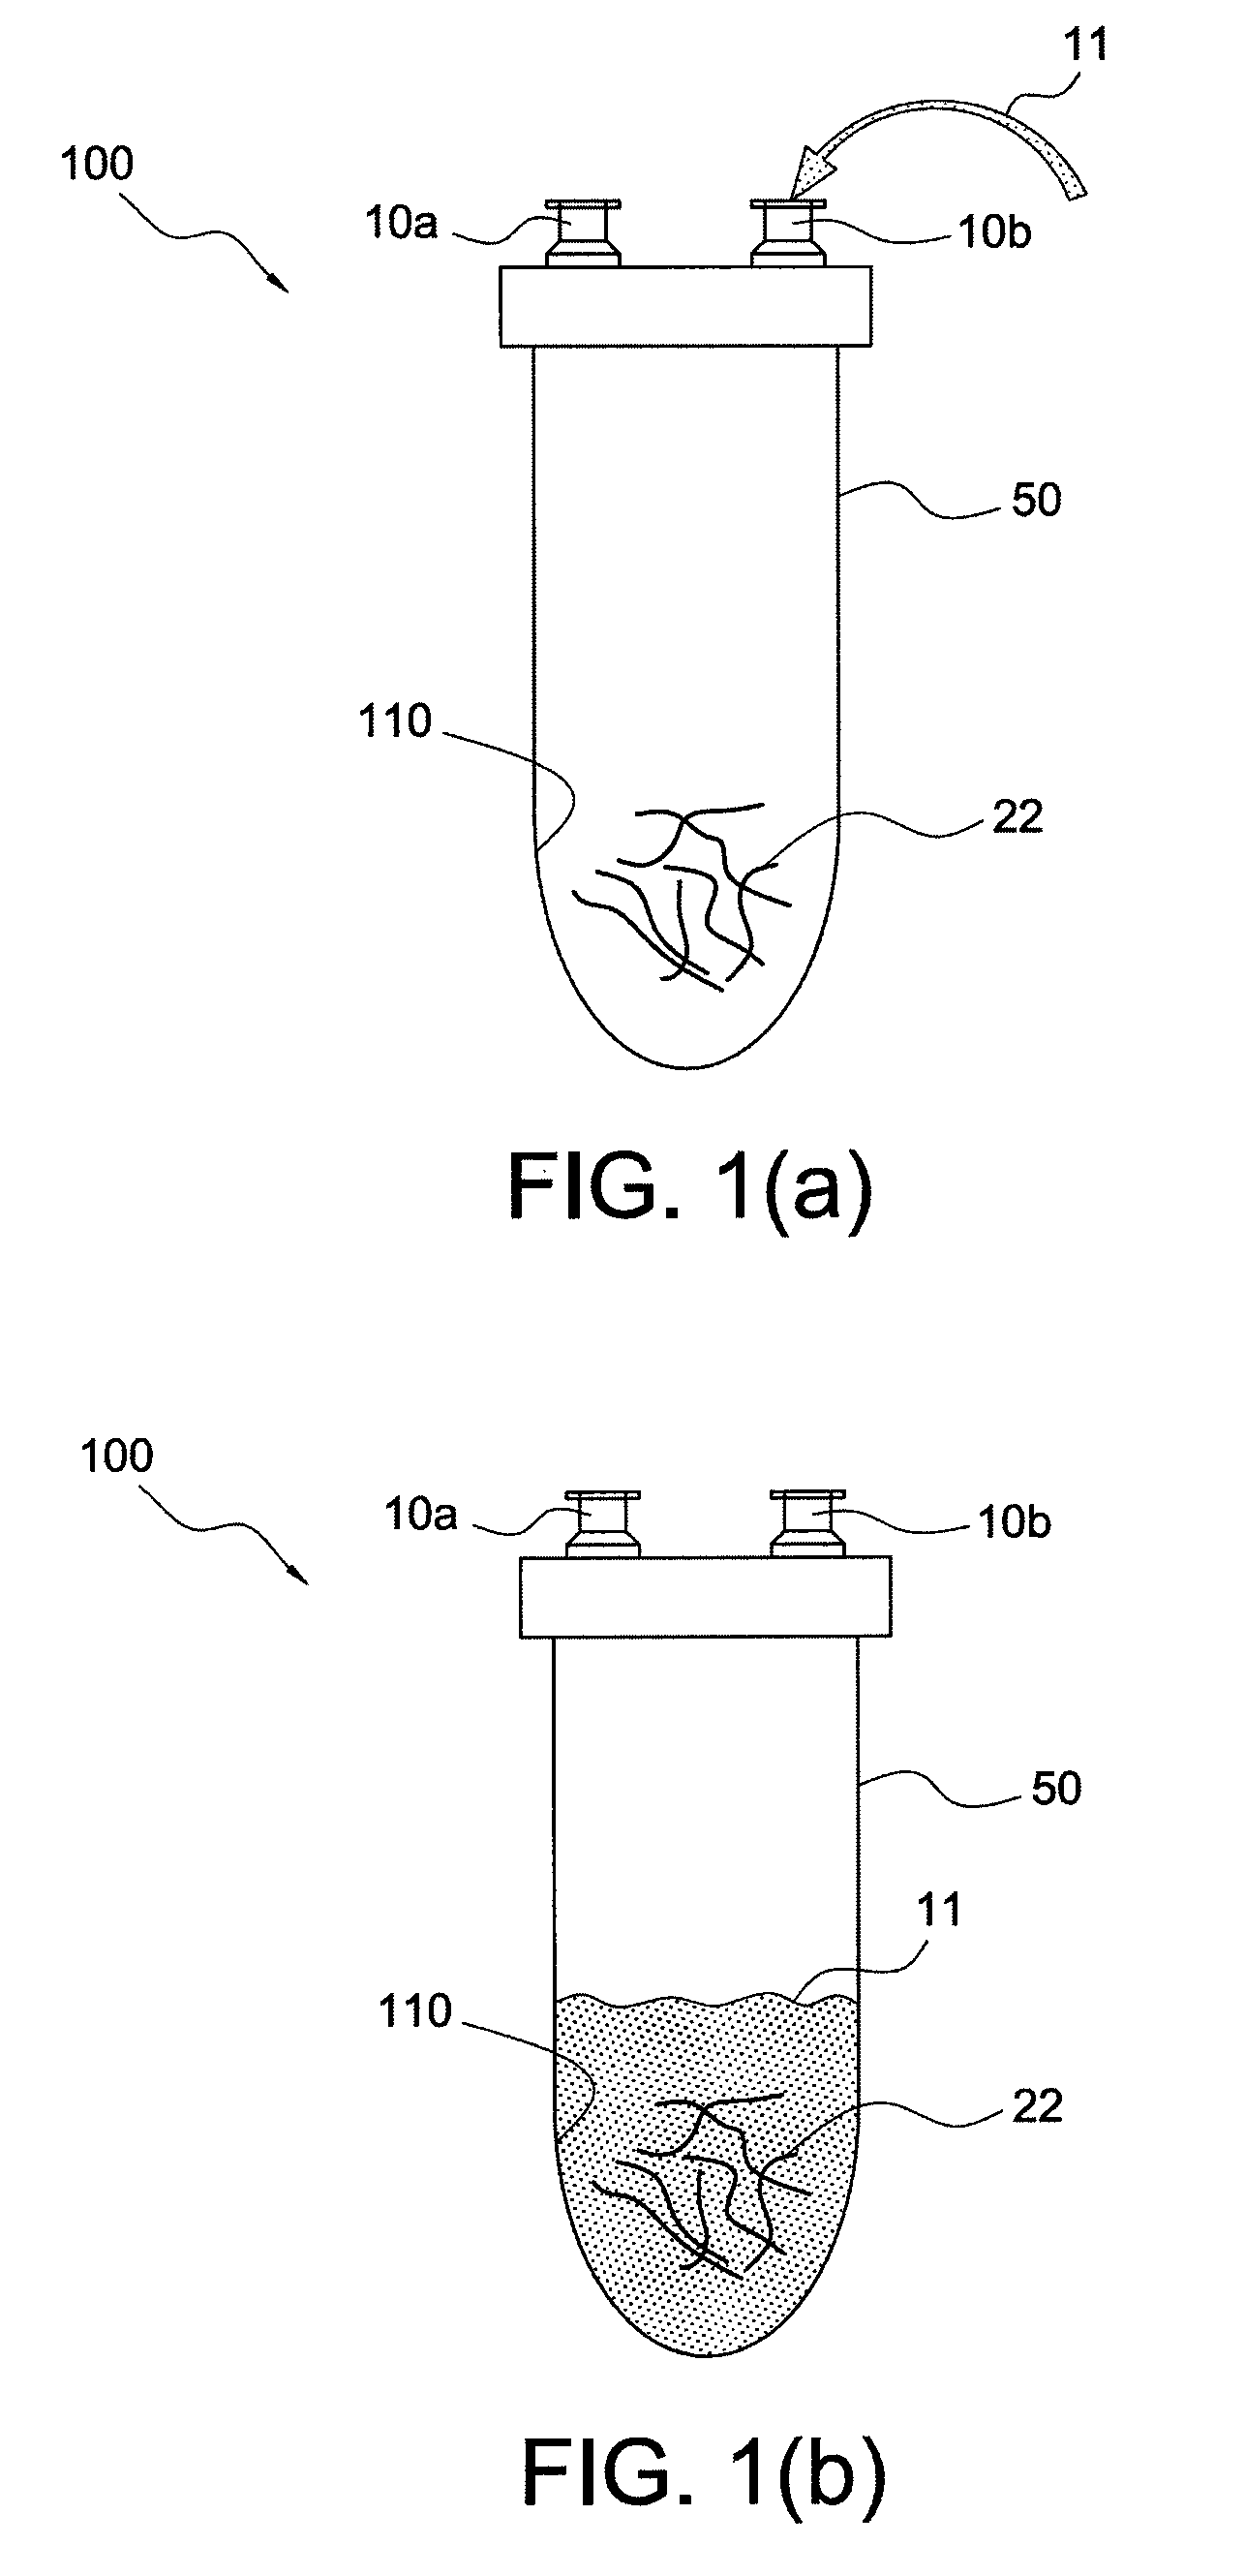 Enhanced autologous growth factor production and delivery system